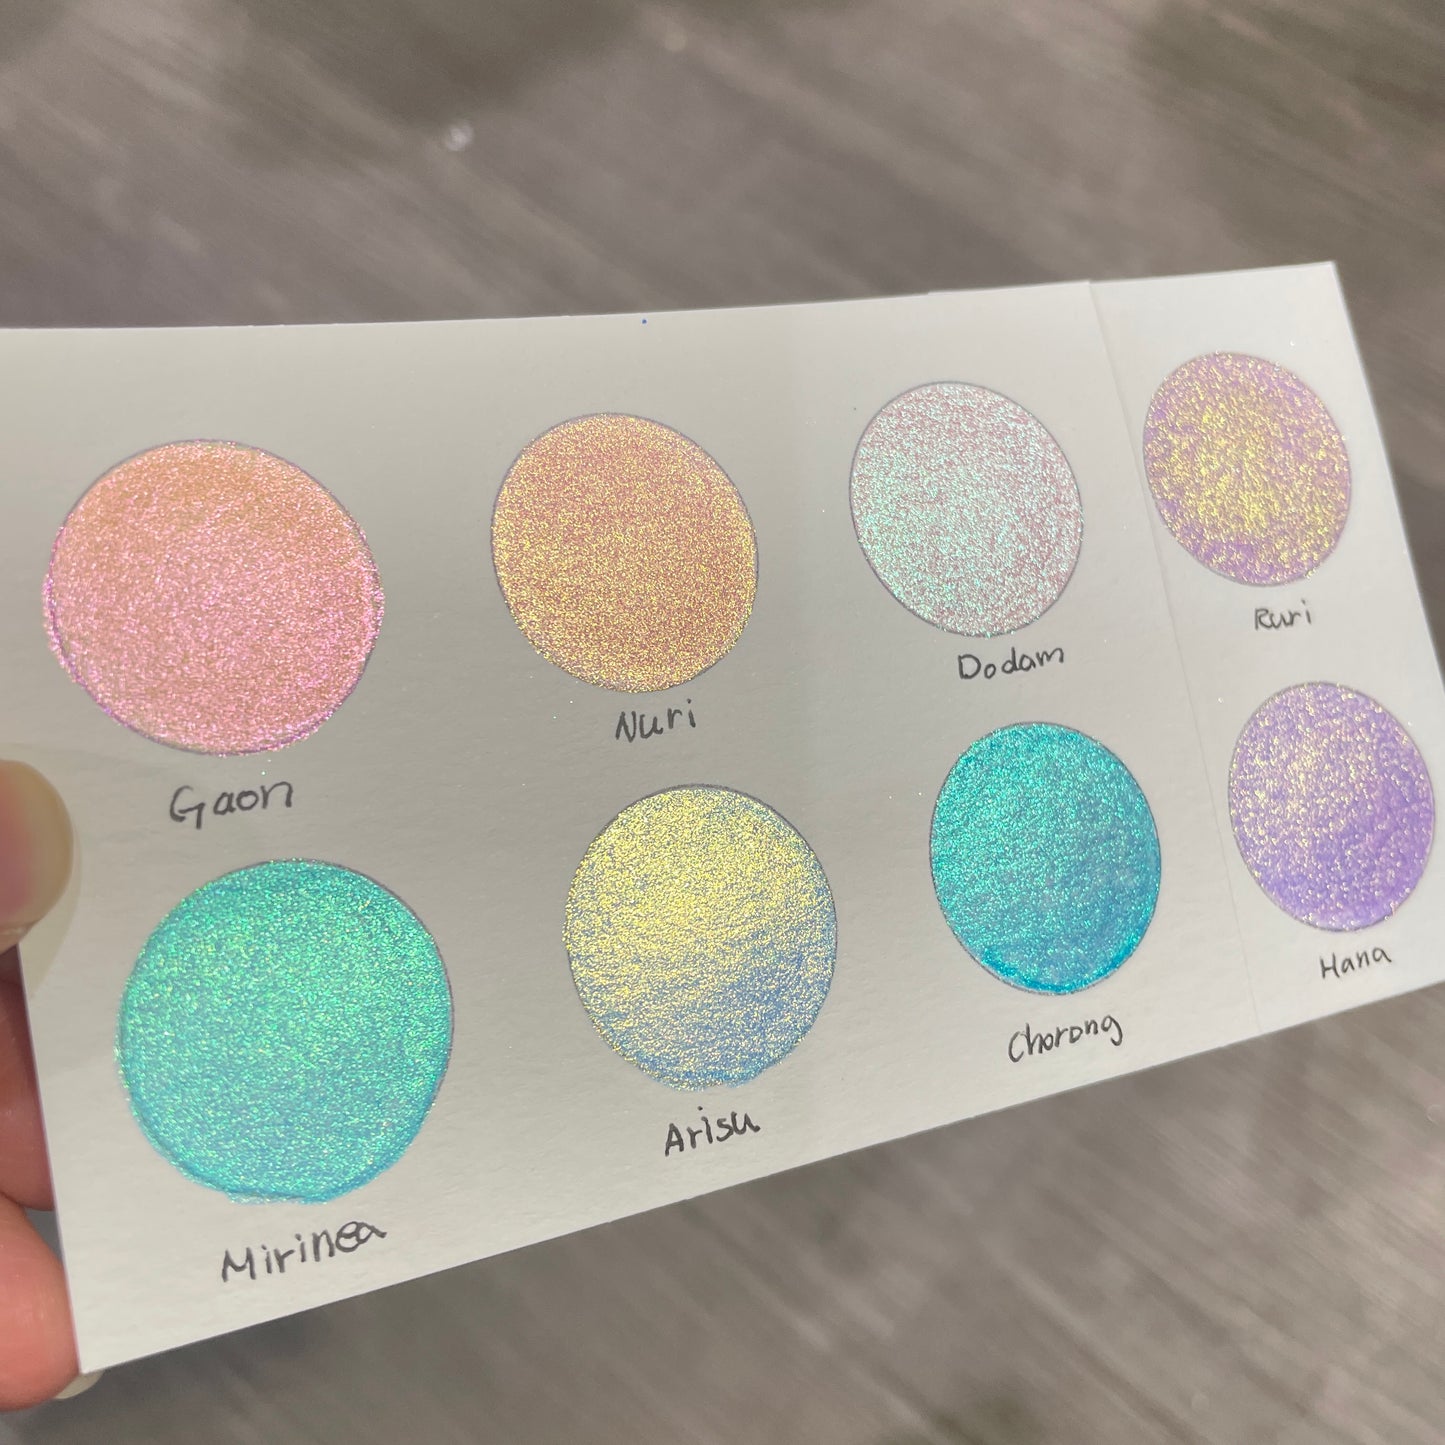 Gaon Half Pan Handmade Color Shift Shimmer Shine Watercolor Paints by iuilewatercolors